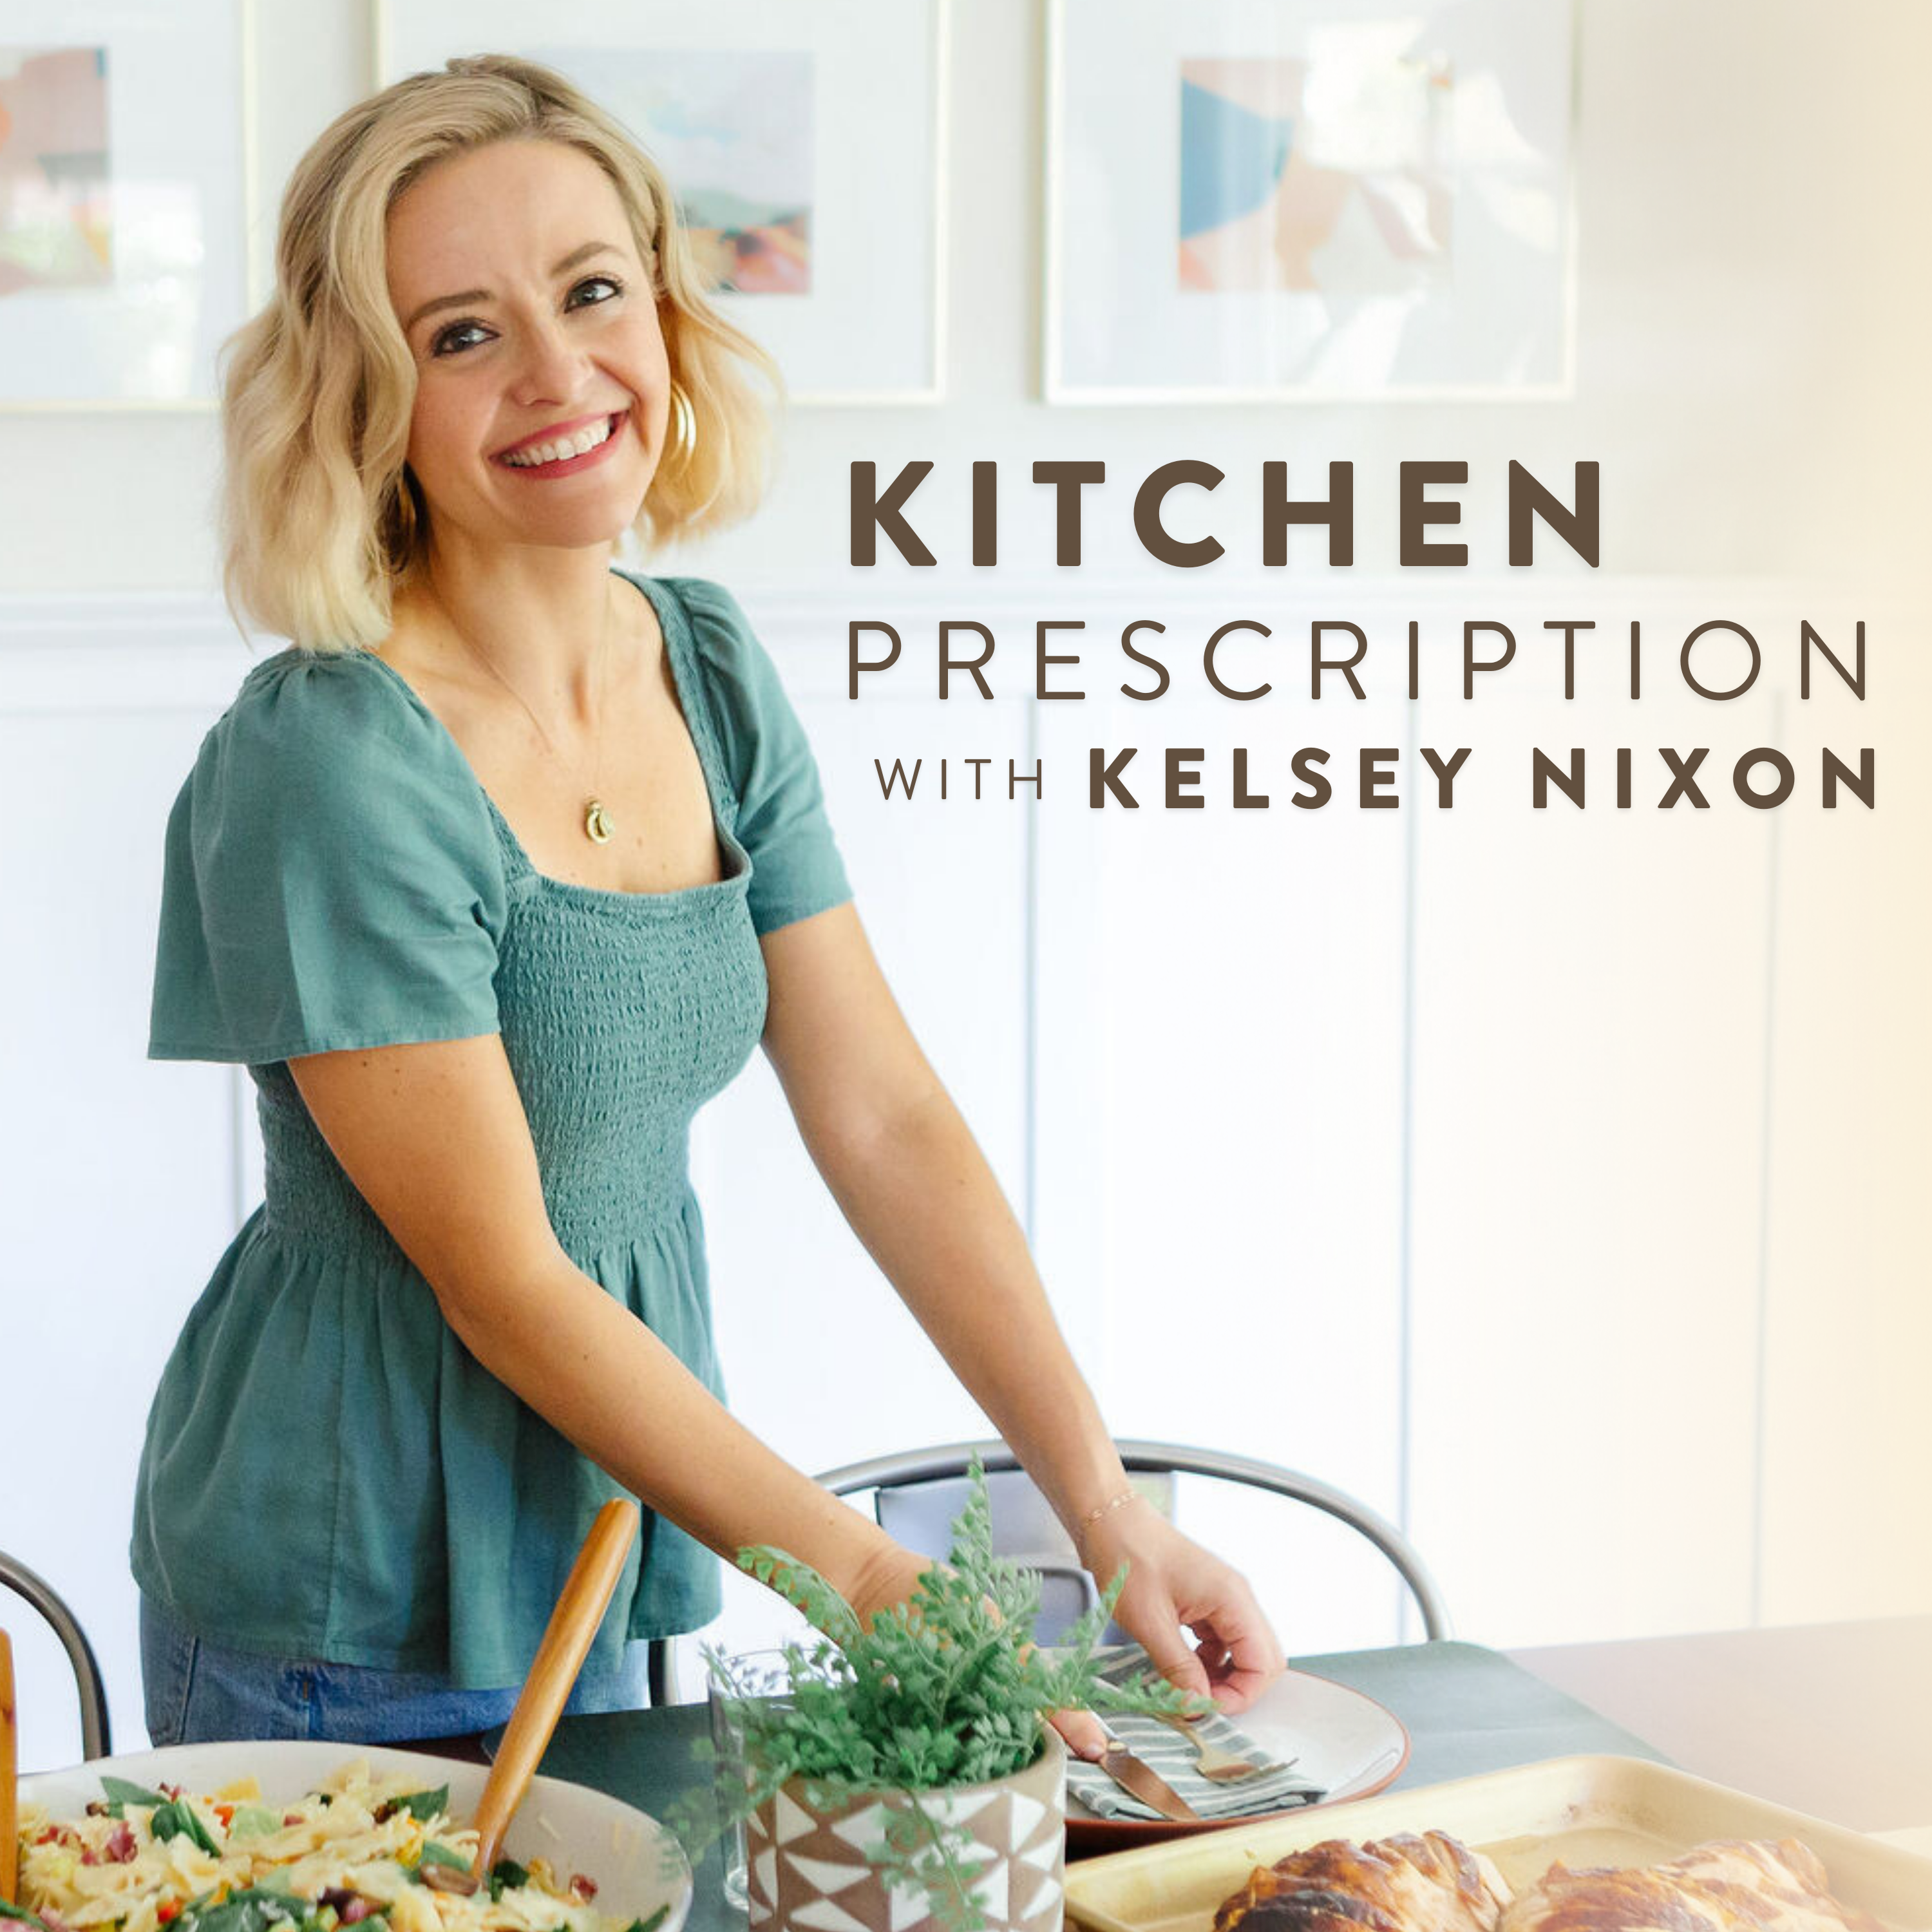 Welcome to Kitchen Prescription with Kelsey Nixon